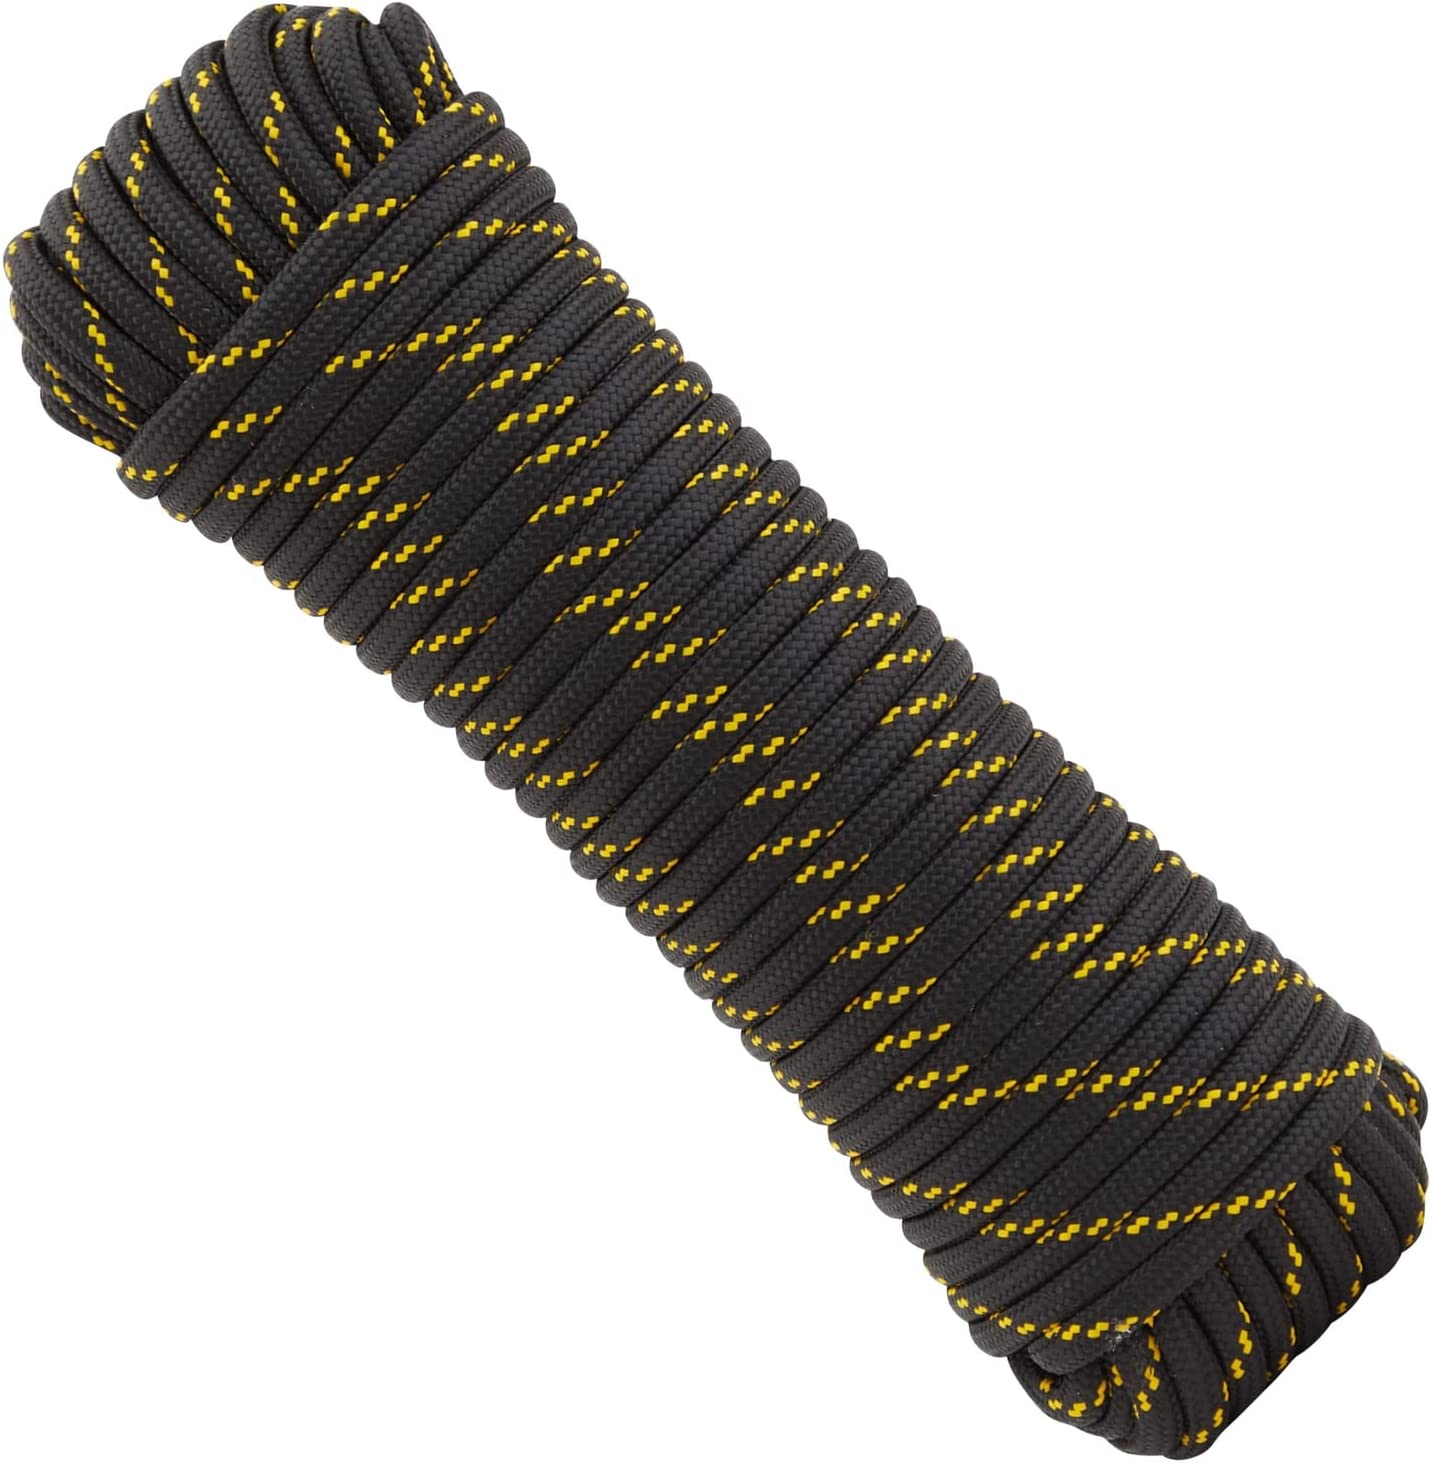 3/8 Inch x 100 Ft Braided Polyester Rope for Knot Tying Practice, Camping, Boats, Trailer Tie Down, Pinata